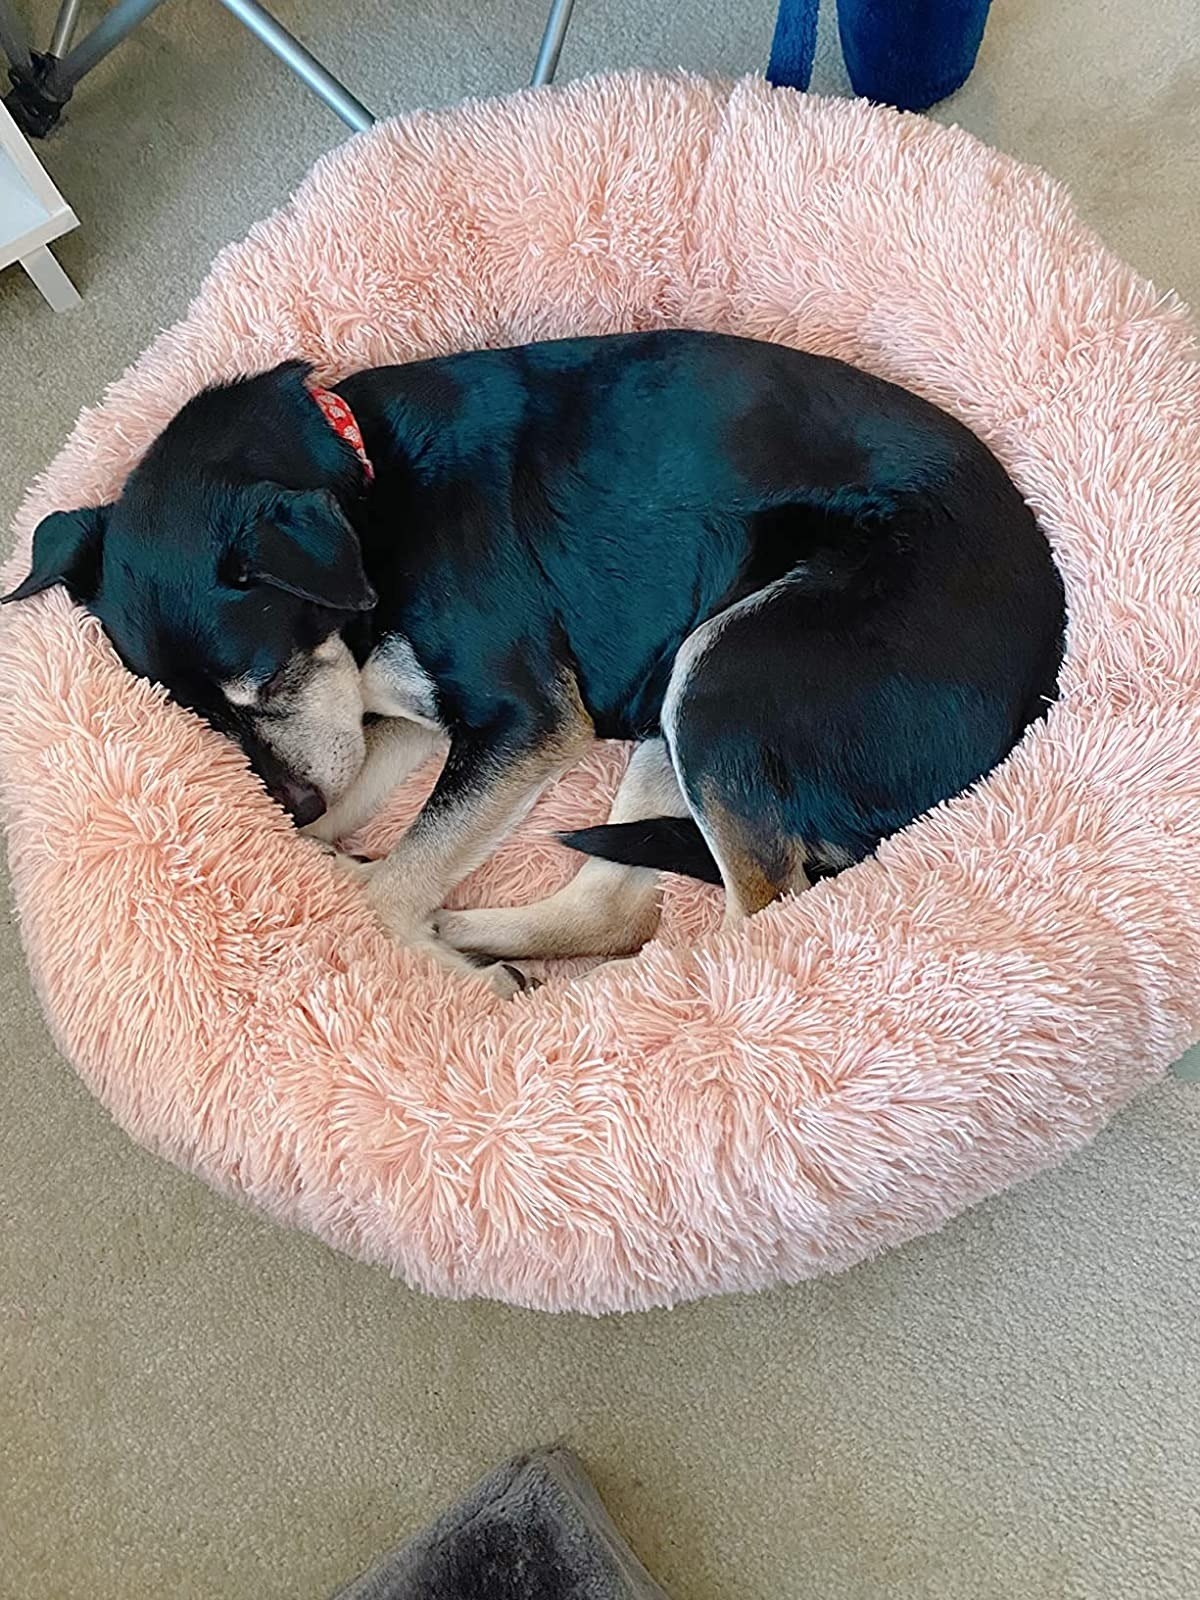 A puppy sleeping on a dog bed